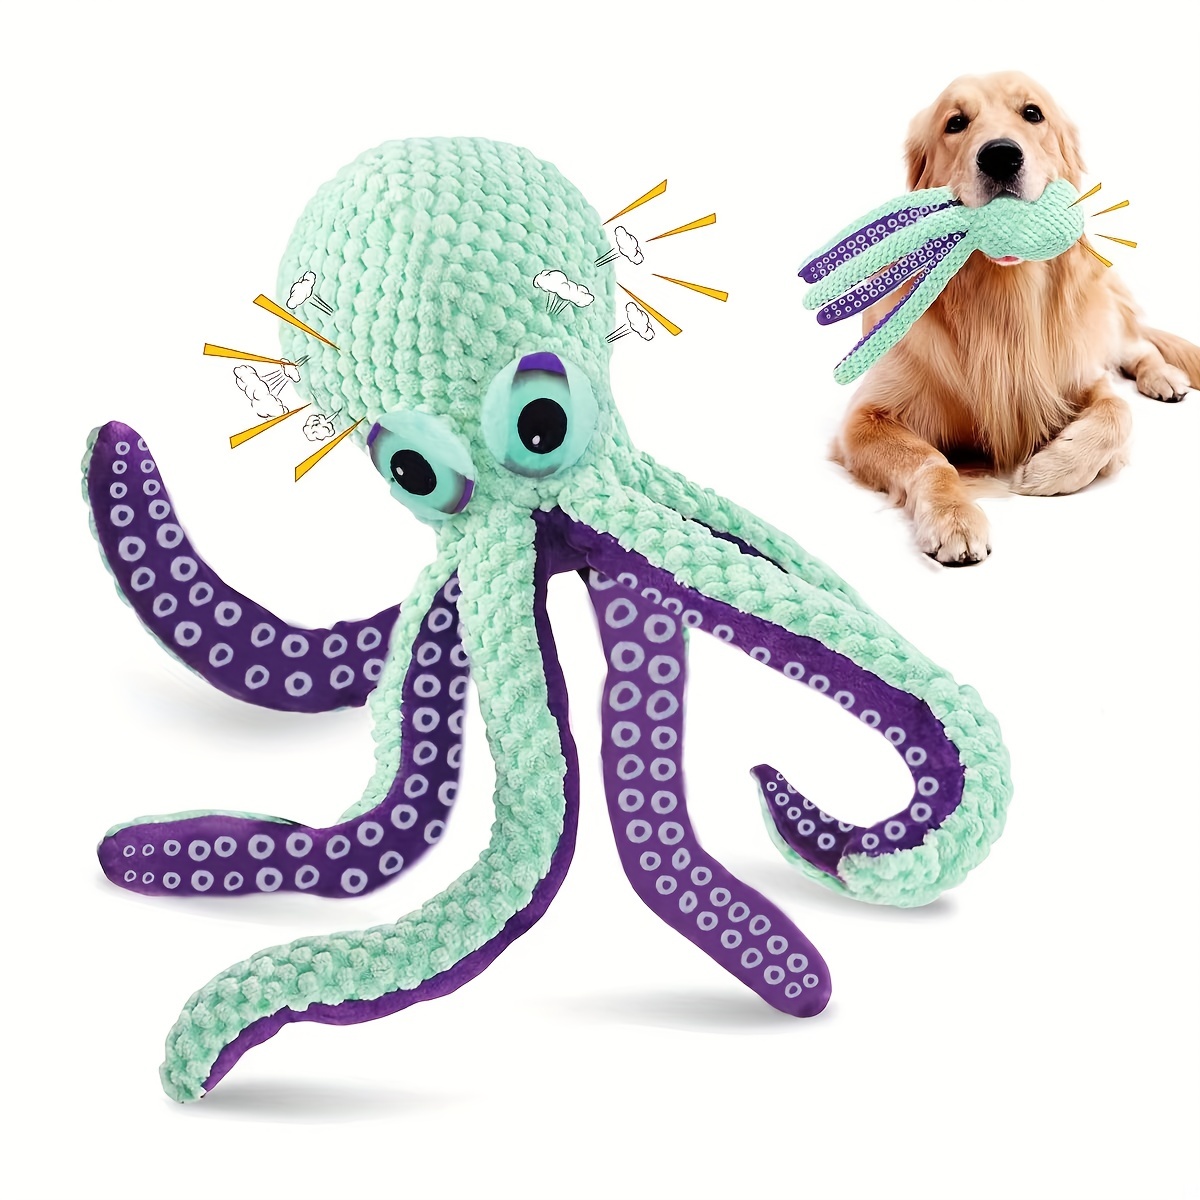 An Octopus Dog Toy That Will Save Your Pup from Boredom!